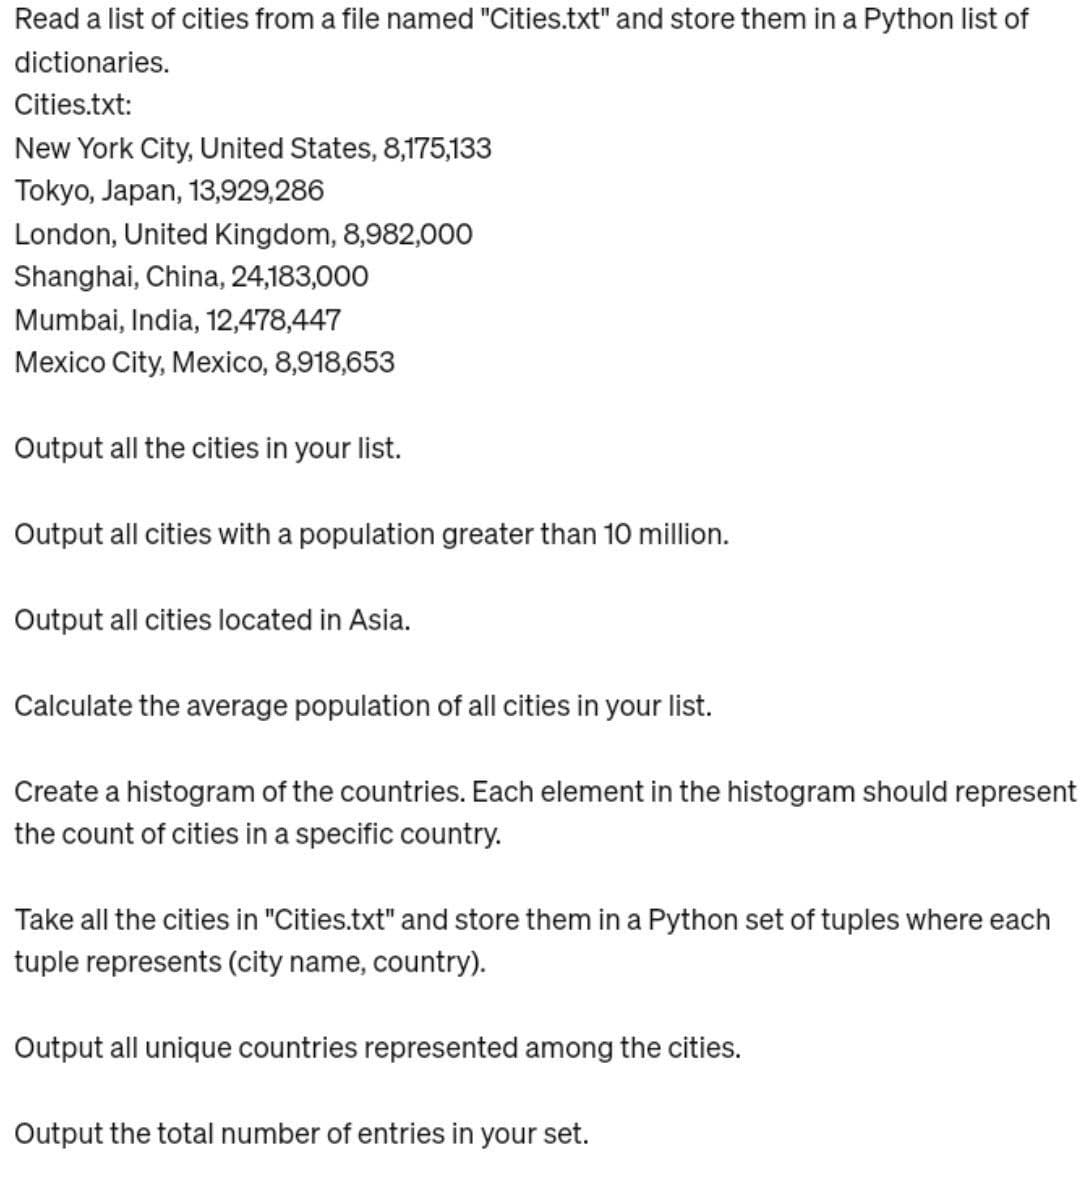 Read a list of cities from a file named "Cities.txt" and store them in a Python list of
dictionaries.
Cities.txt:
New York City, United States, 8,175,133
Tokyo, Japan, 13,929,286
London, United Kingdom, 8,982,000
Shanghai, China, 24,183,000
Mumbai, India, 12,478,447
Mexico City, Mexico, 8,918,653
Output all the cities in your list.
Output all cities with a population greater than 10 million.
Output all cities located in Asia.
Calculate the average population of all cities in your list.
Create a histogram of the countries. Each element in the histogram should represent
the count of cities in a specific country.
Take all the cities in "Cities.txt" and store them in a Python set of tuples where each
tuple represents (city name, country).
Output all unique countries represented among the cities.
Output the total number of entries in your set.